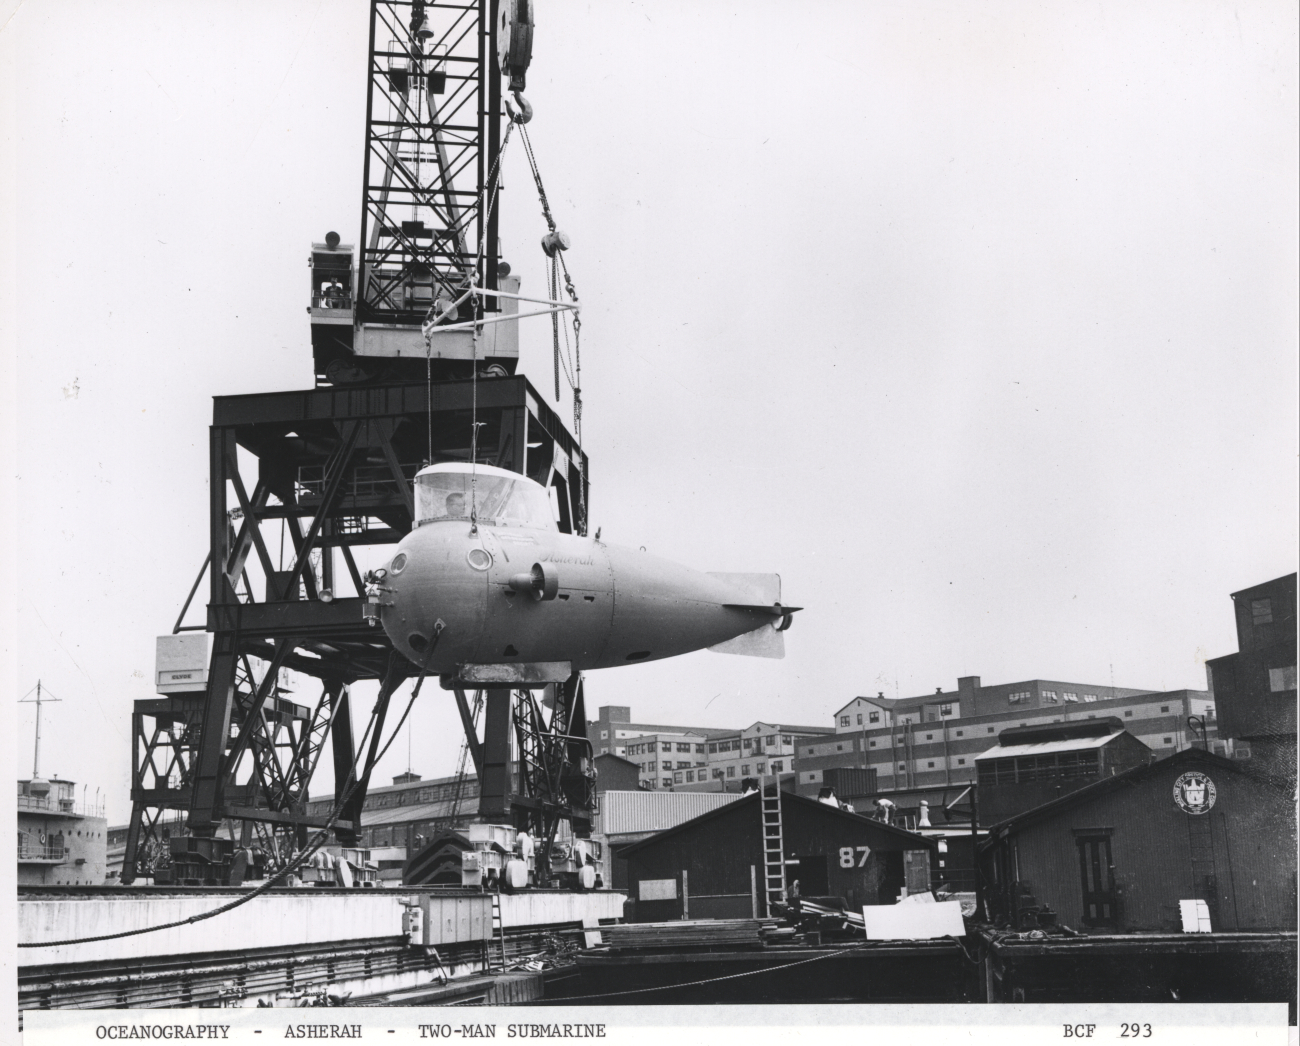 Submersible ASHERAH at the Whaling City Dredge and Dock Corporationfacility